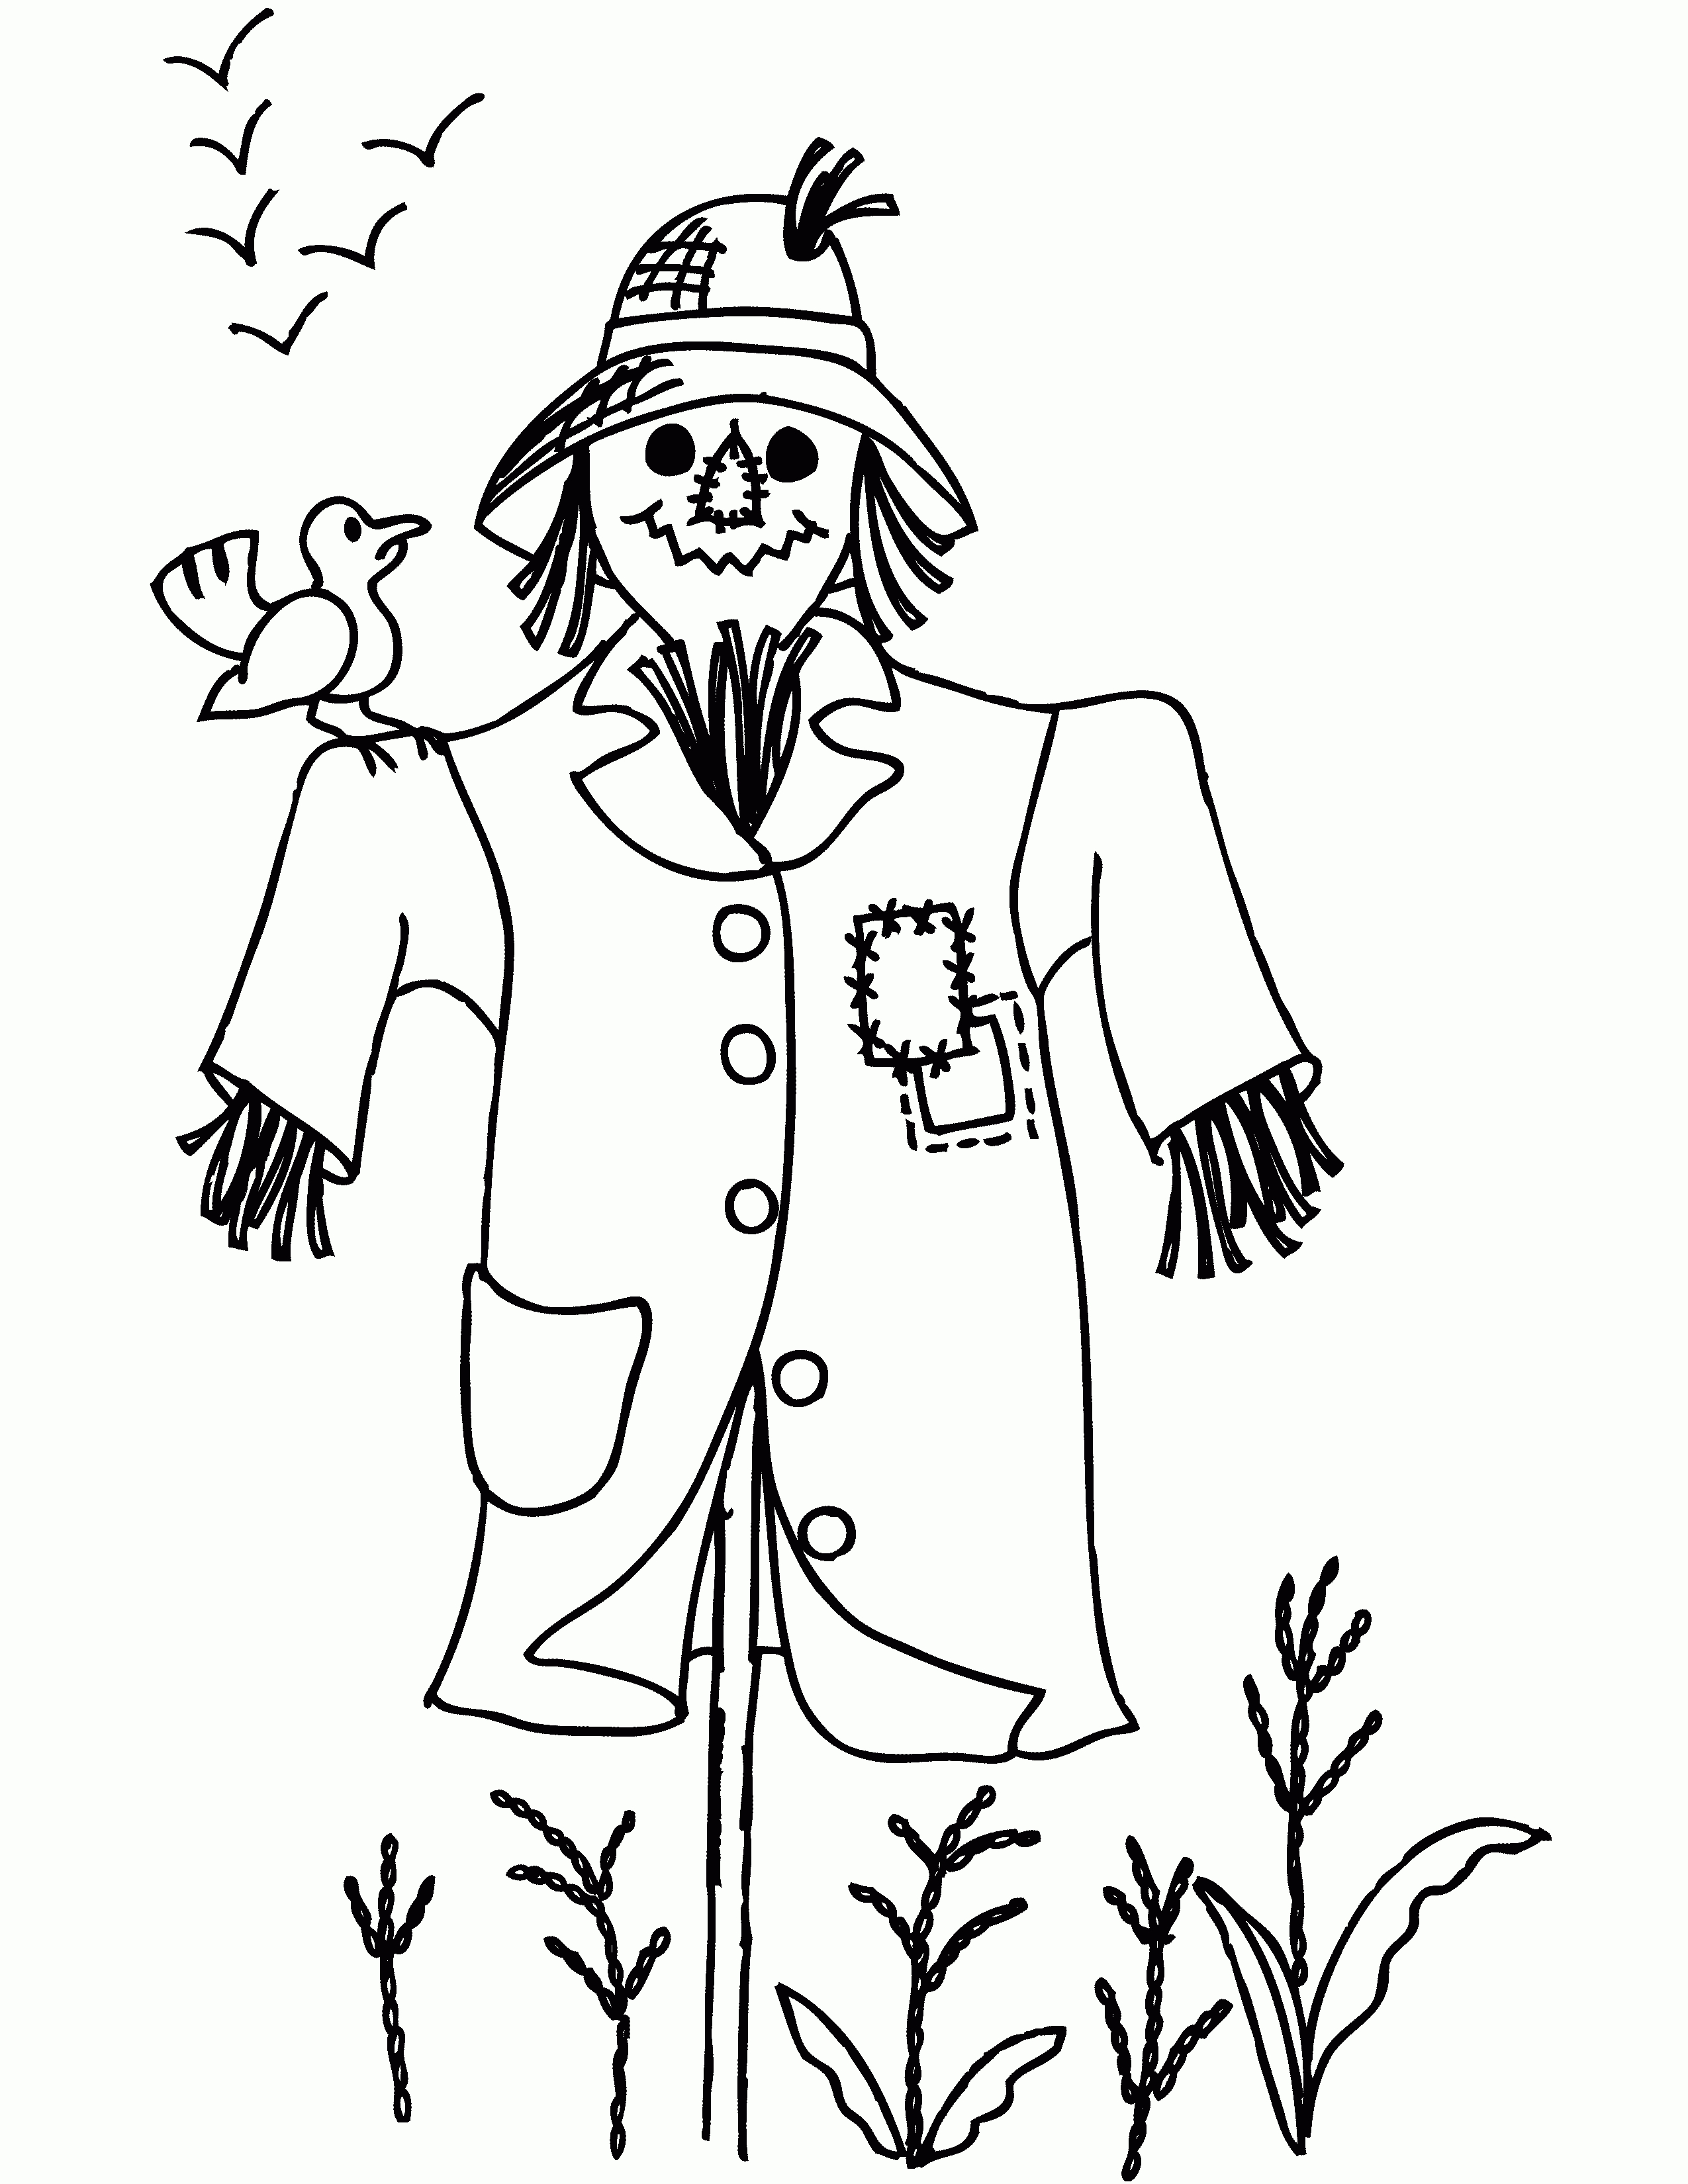 Free Printable Scarecrow Coloring Pages For Kids | Scarecrow Designs - Free Scarecrow Template Printable